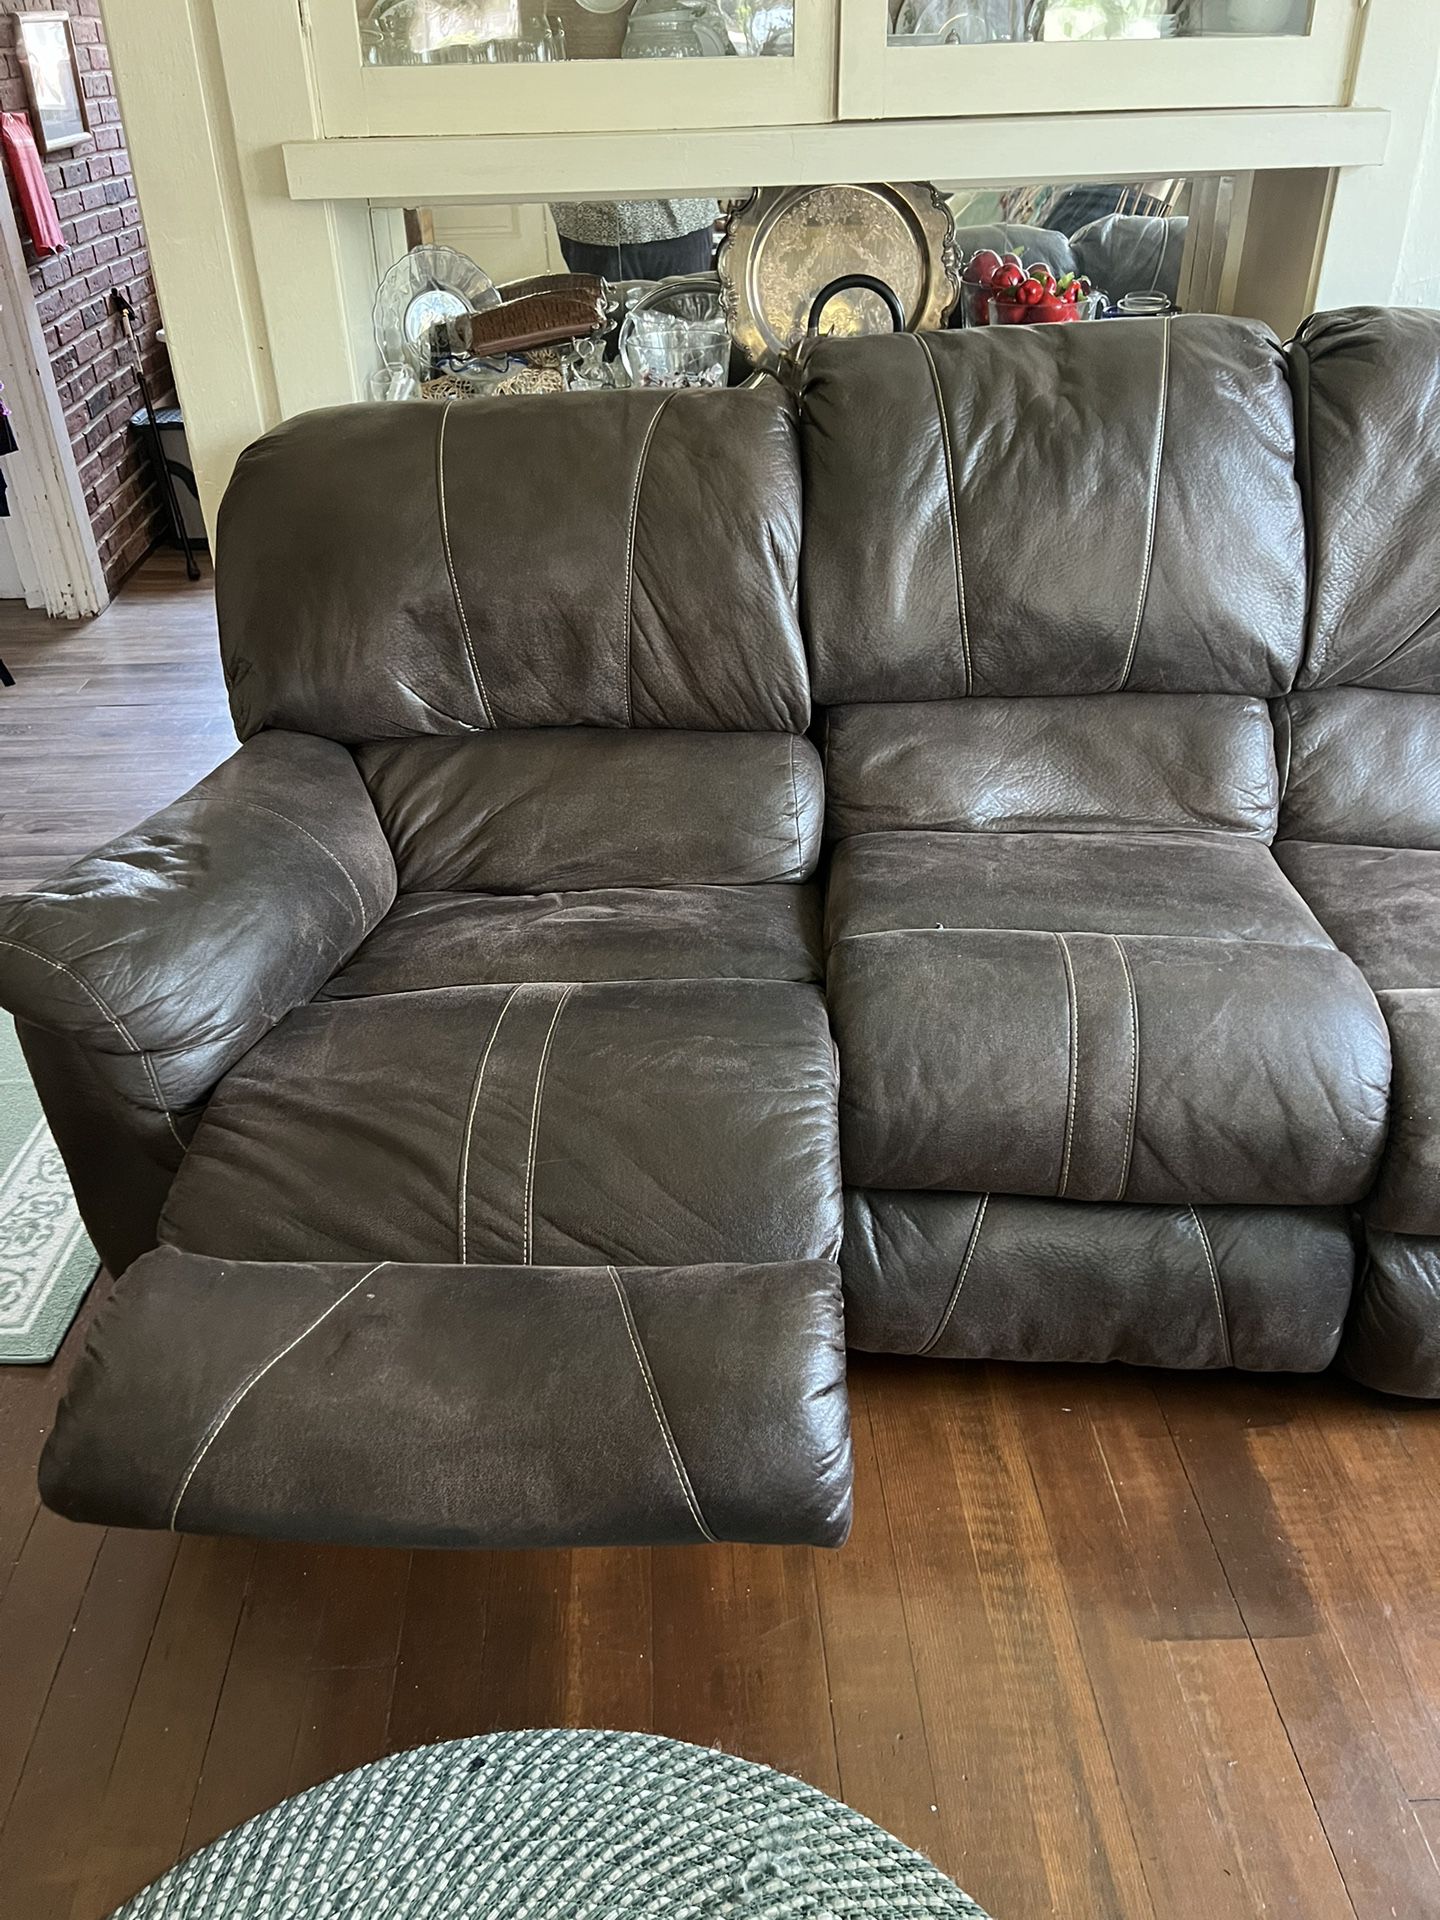 Couch Used In Good Condition. 